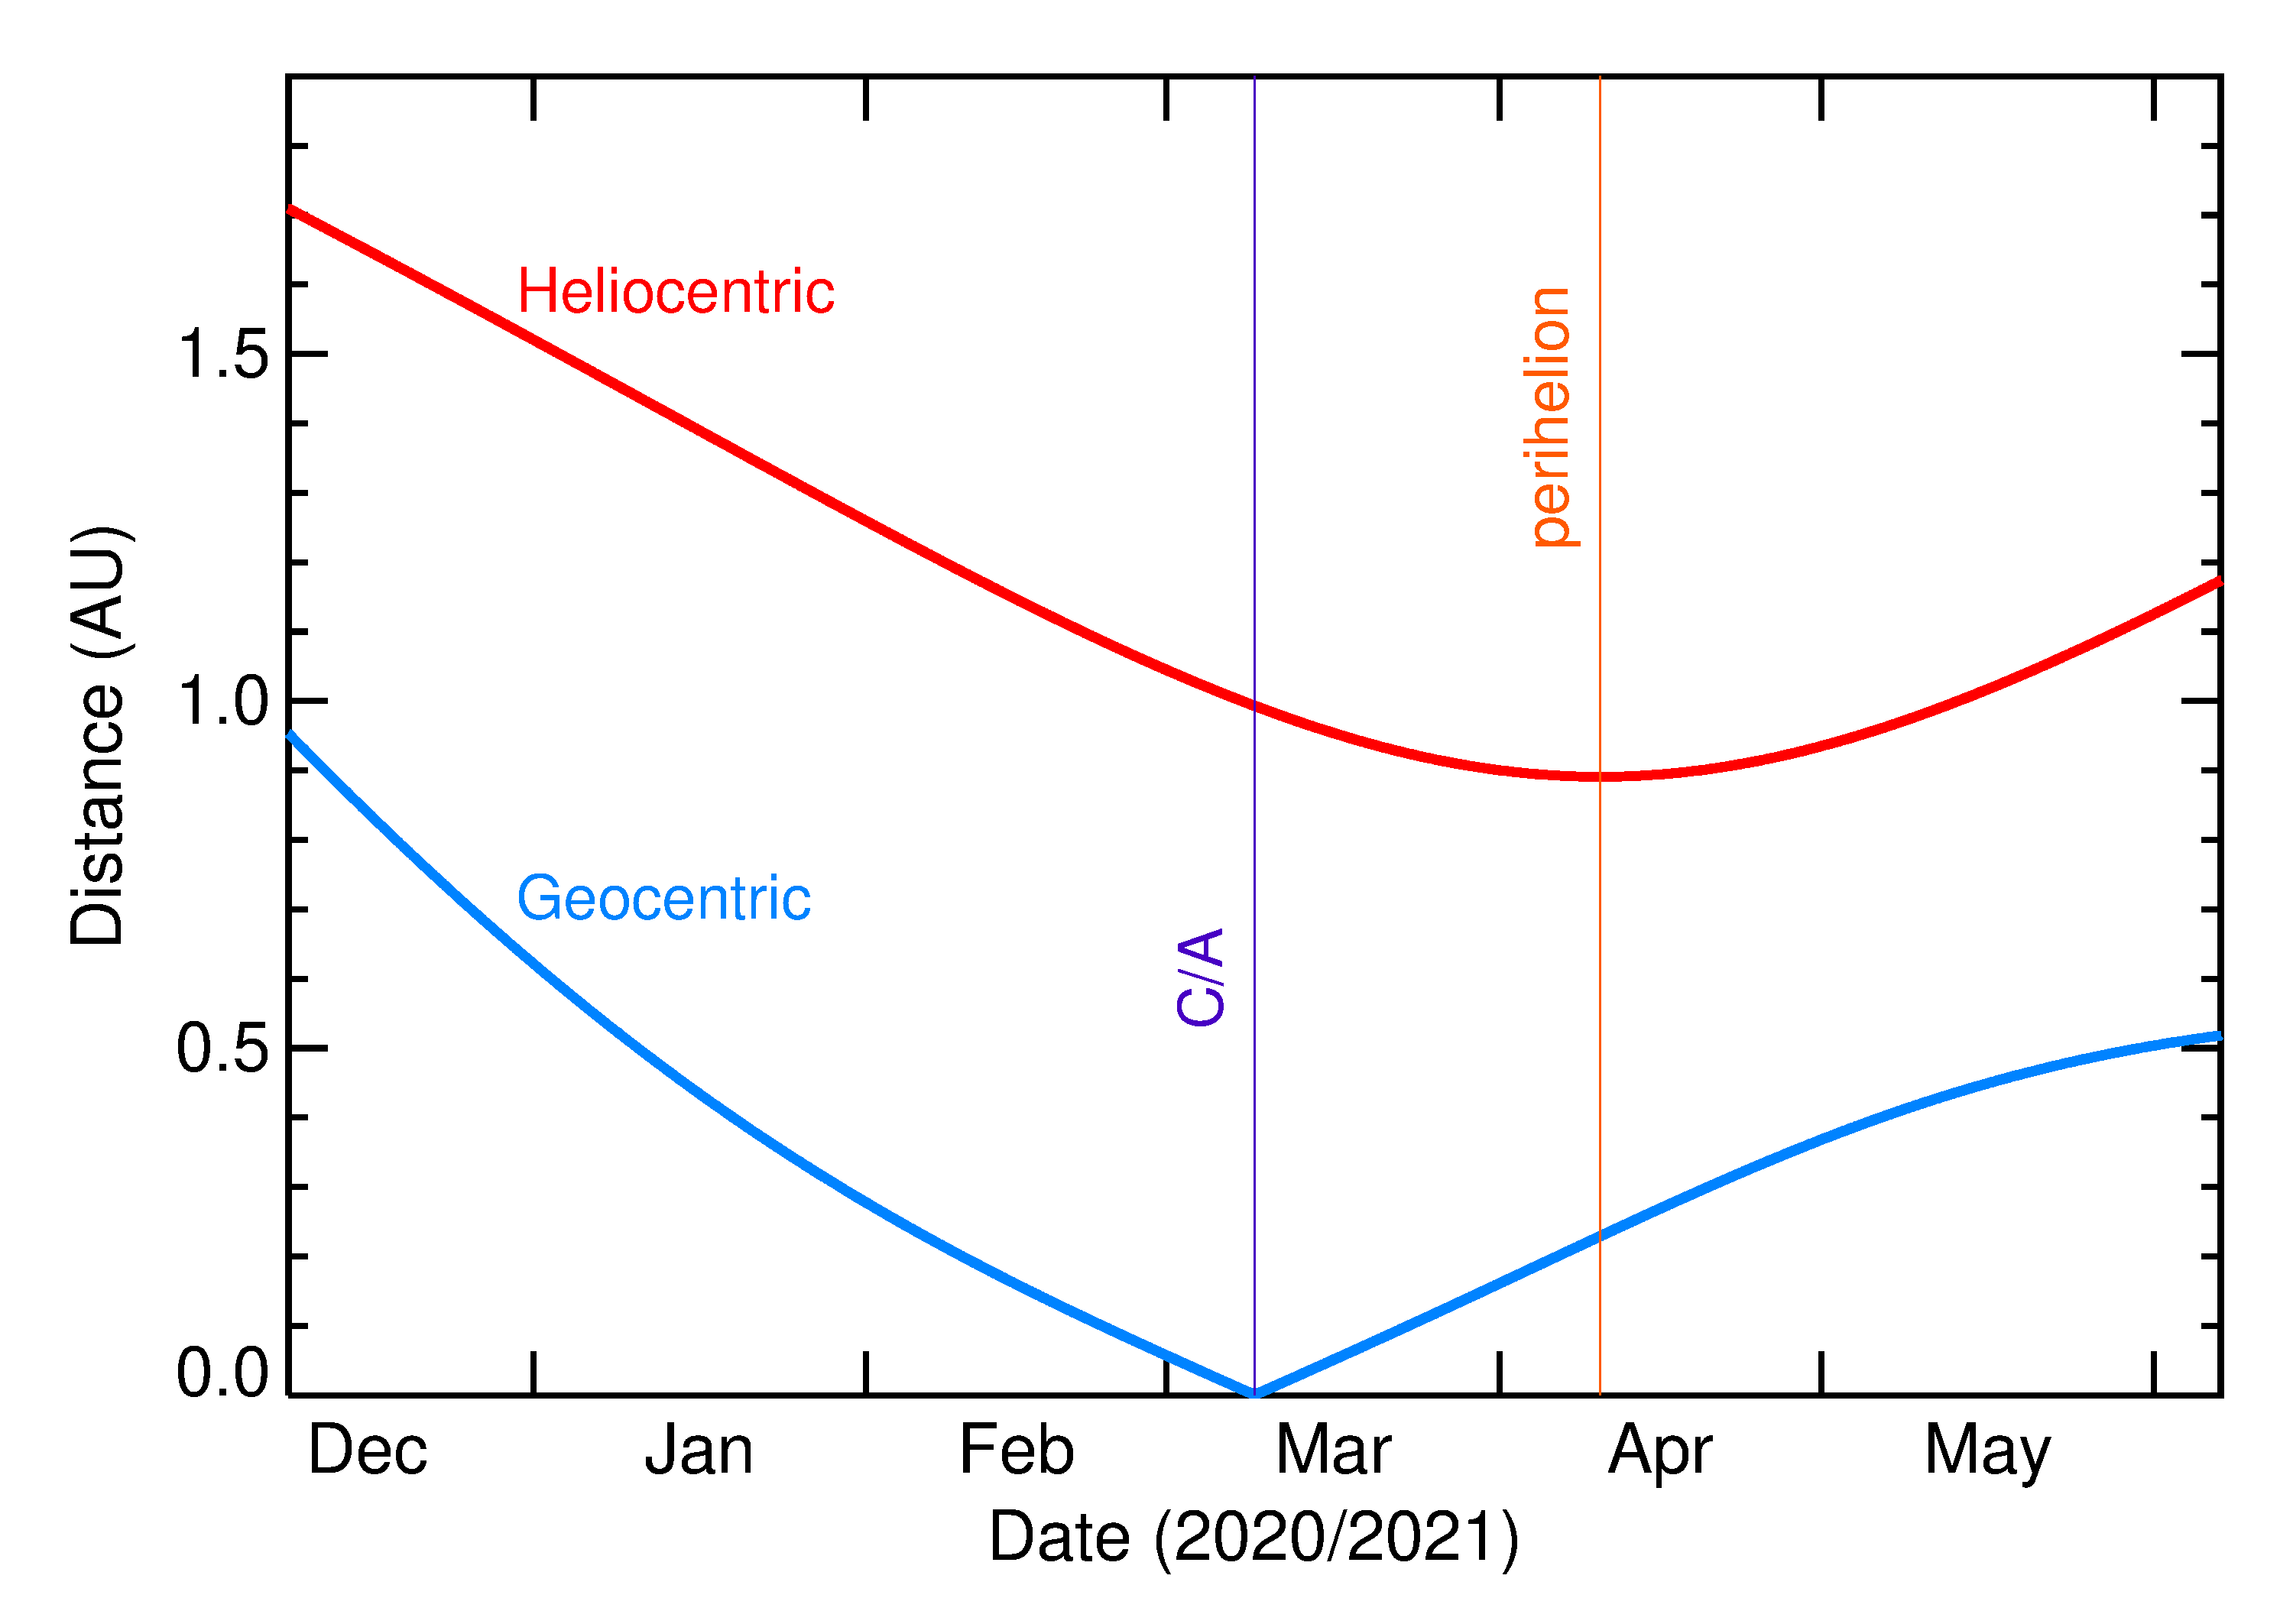 Heliocentric and Geocentric Distances of 2021 EF1 in the months around closest approach